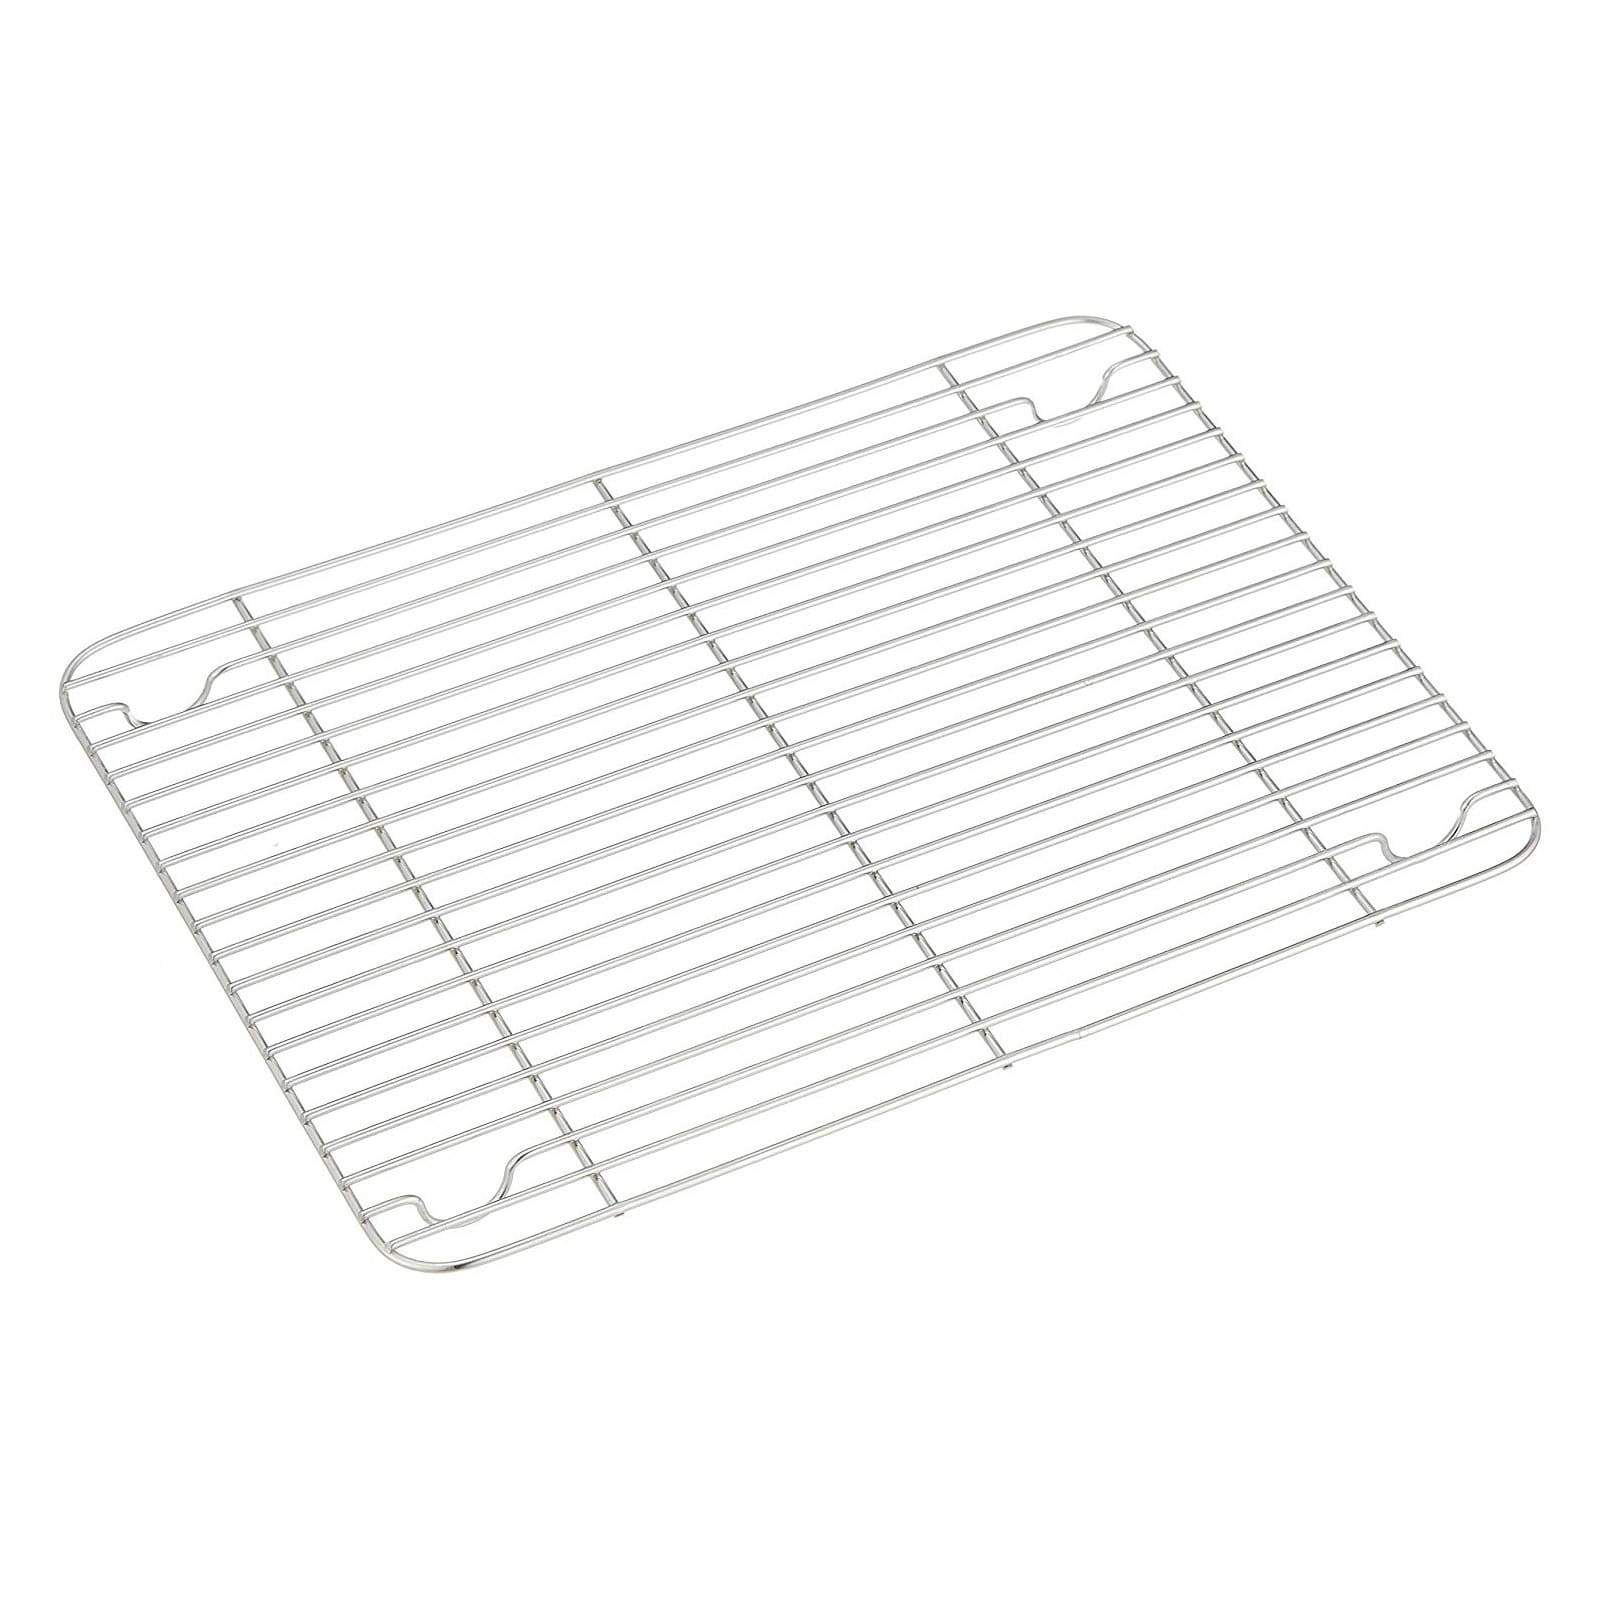 Ikeda Ecoclean Square Mesh Bat Pitch Width 6 mm (9 Sizes) No.9 (175x135mm) Cooling rack